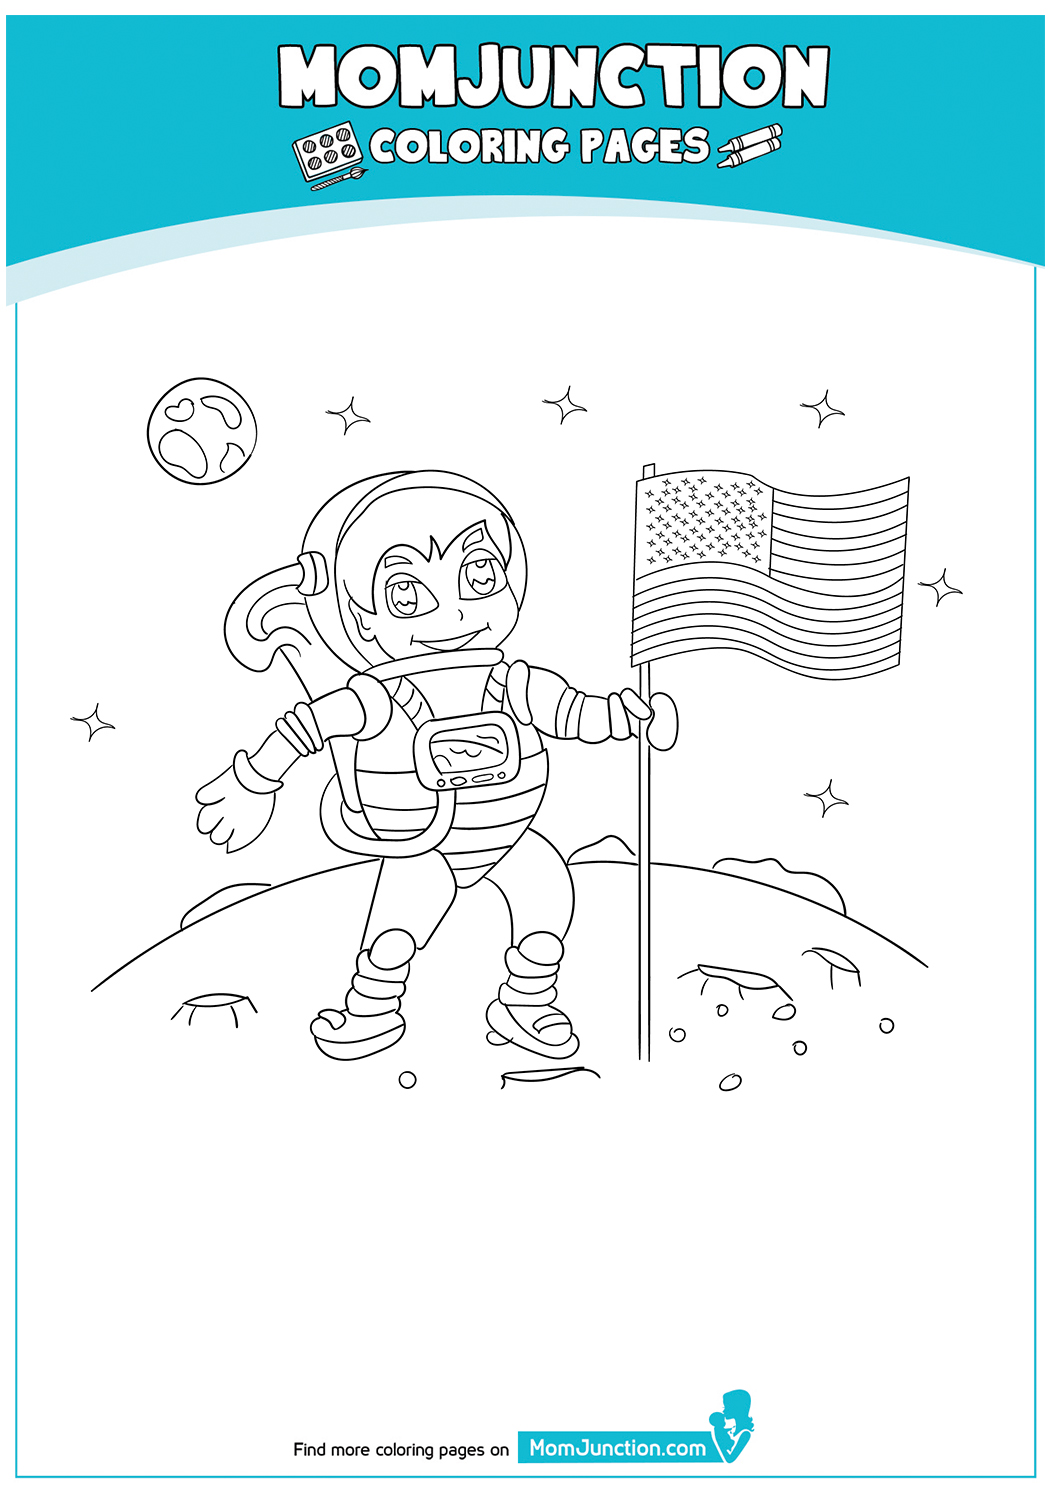 The-Astronaut-On-The-Moon-with-Flag-17